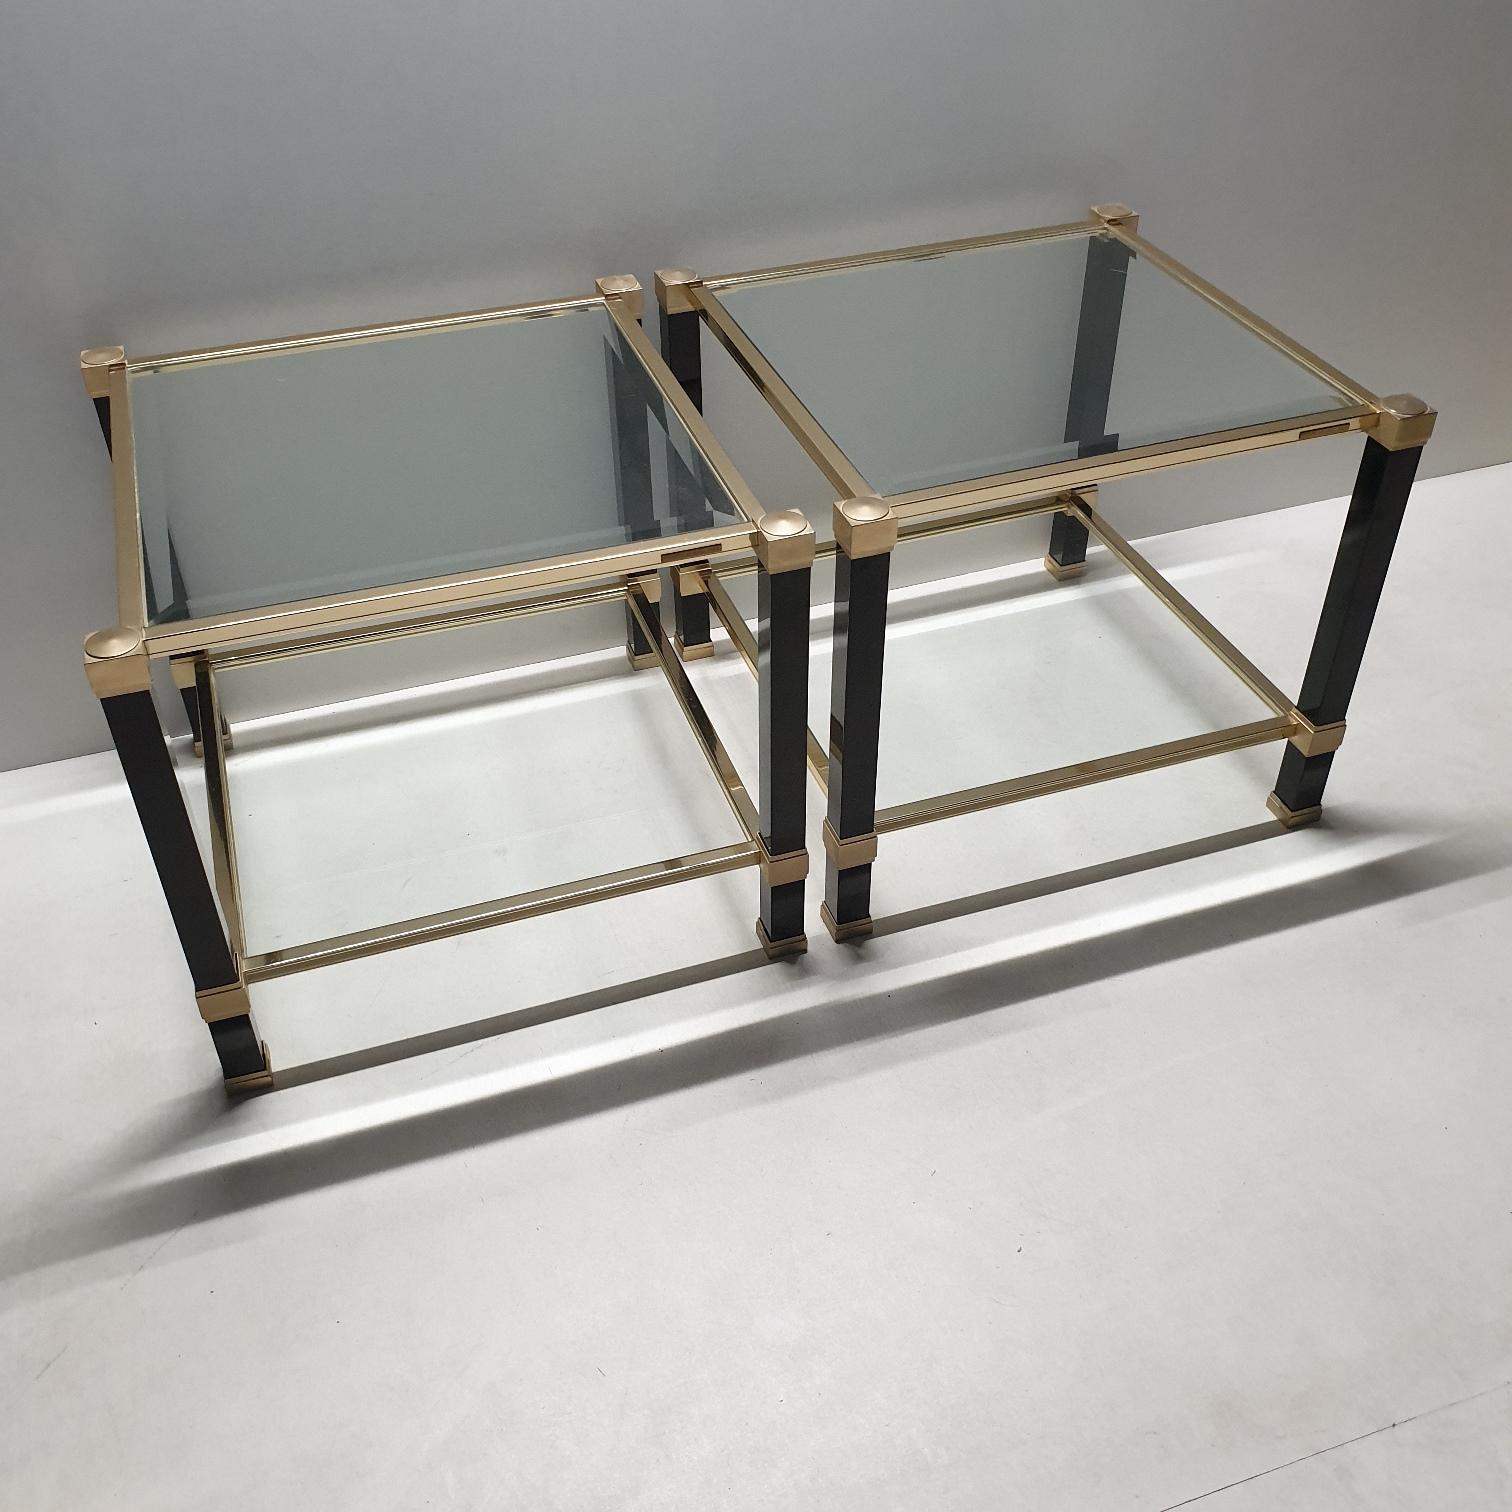 Pair of Brass 2-Tiers Square Site Tables by Pierre Vandel, 1980s, 1 Set of 2 For Sale 5